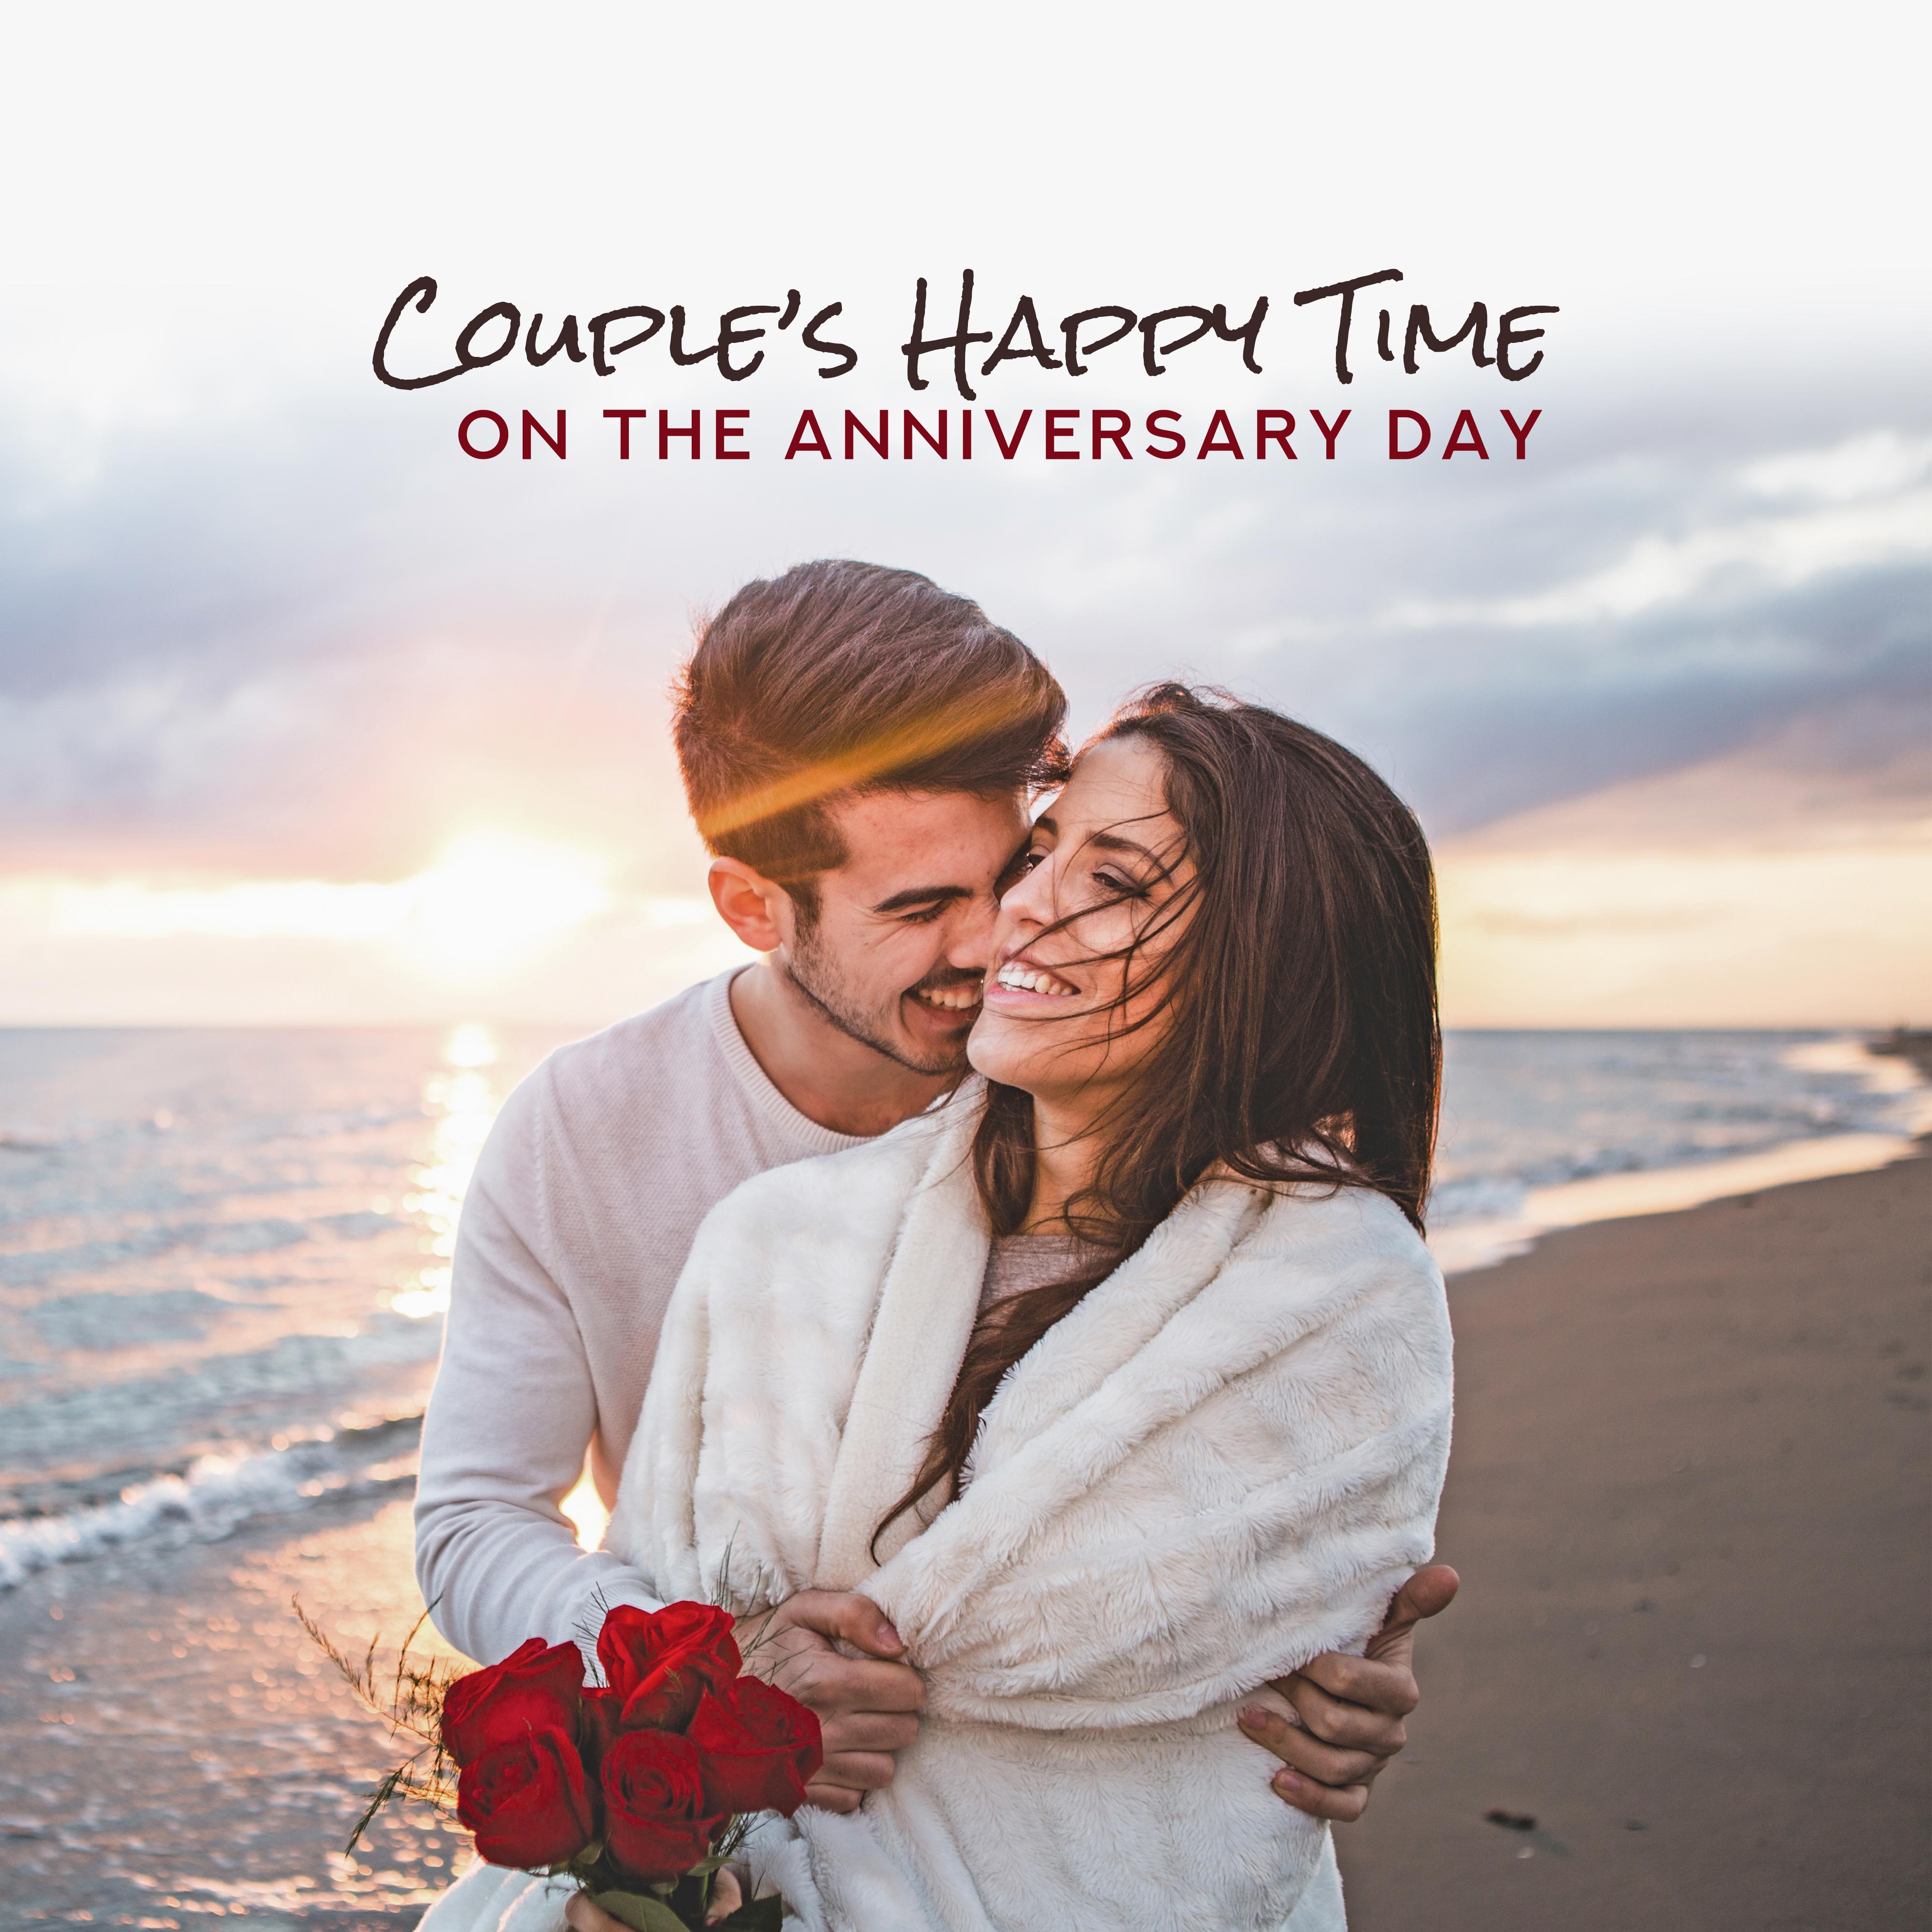 Couple’s Happy Time on the Anniversary Day: Soft Piano Jazz Music Compilation for Romantic Moments in the Restaurant or at Home